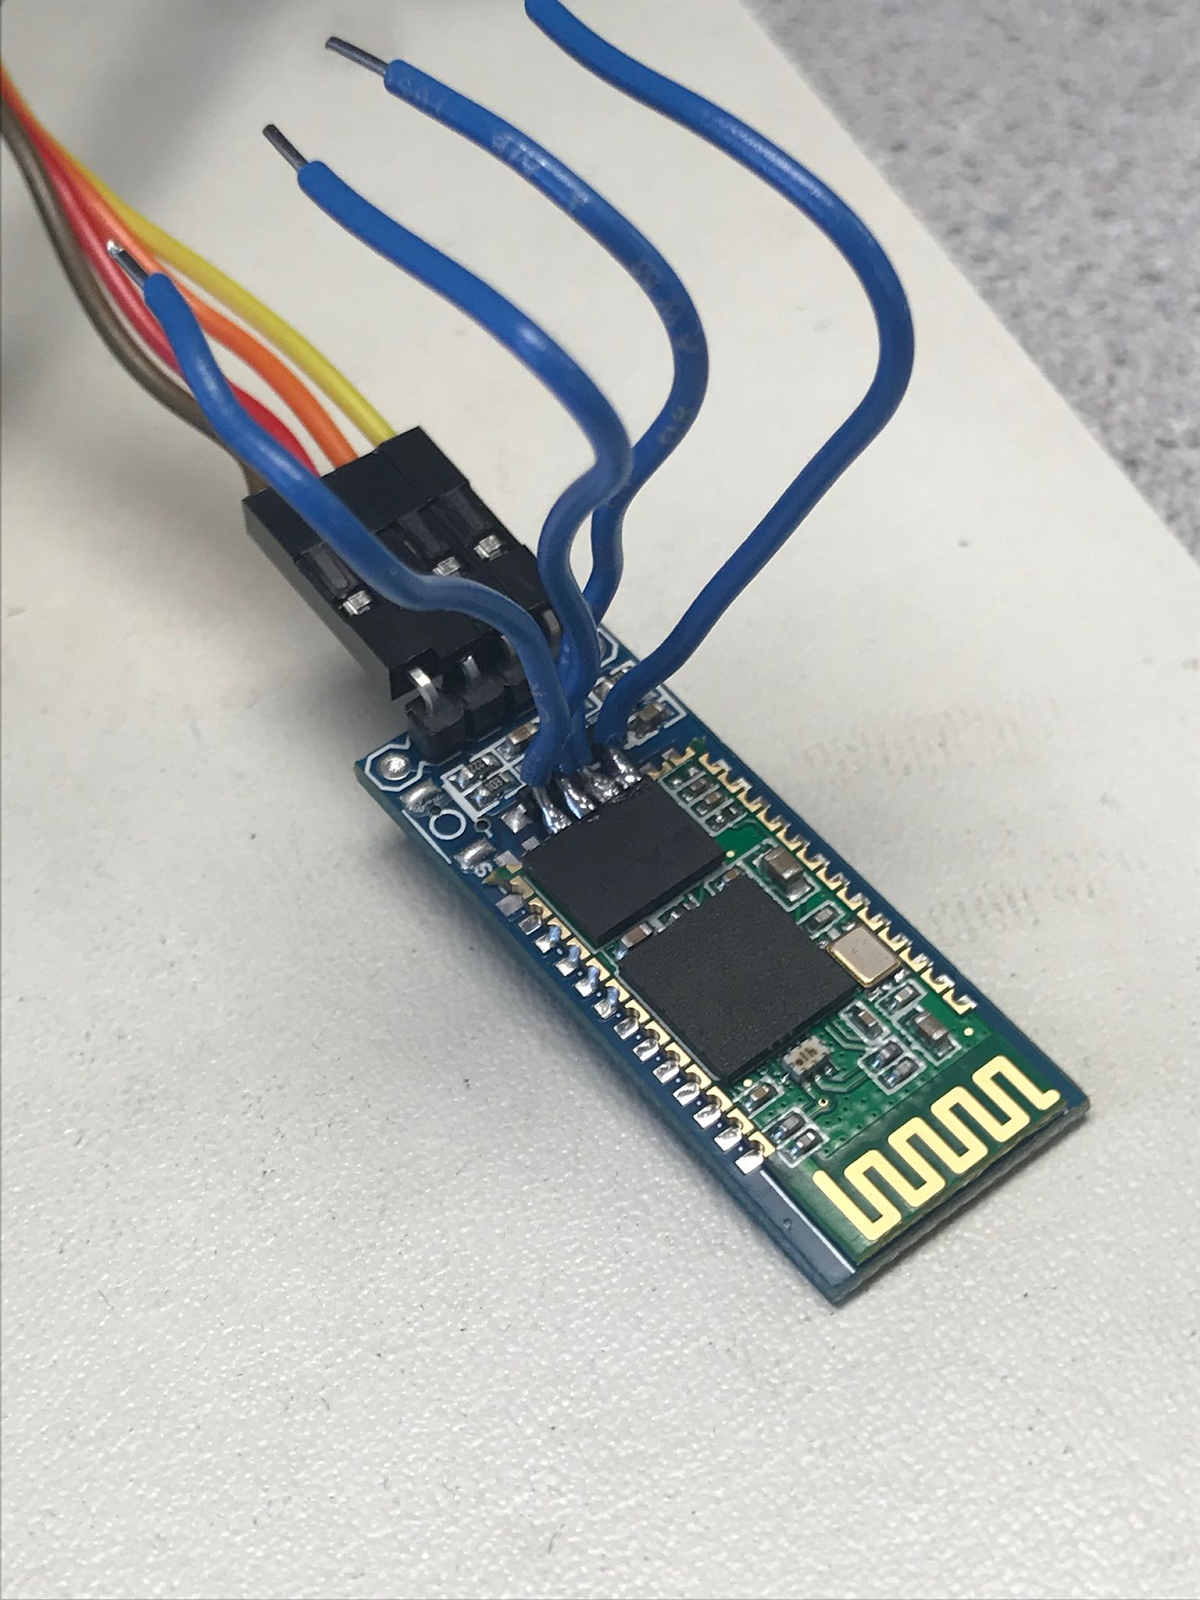 Breaking out SPI lines on bluetooth